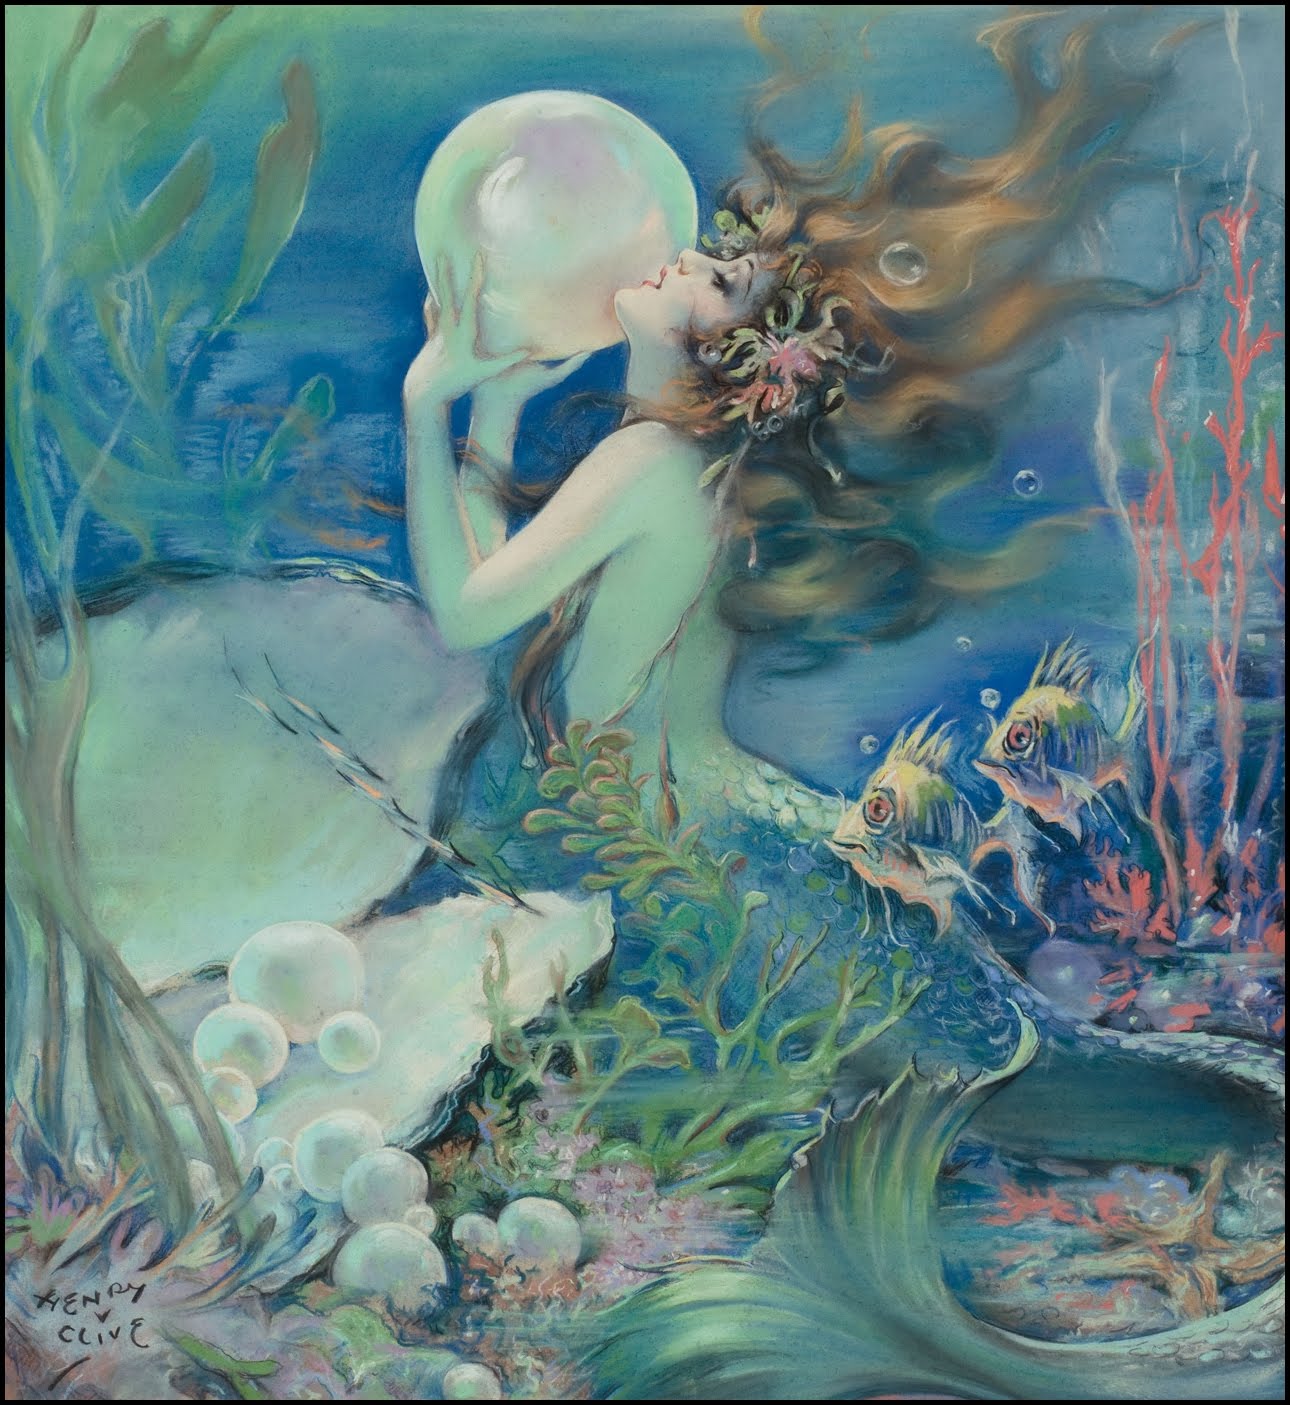 The Mermaid , by Henry O39;Hara Clive. Cover art for American Weekly 